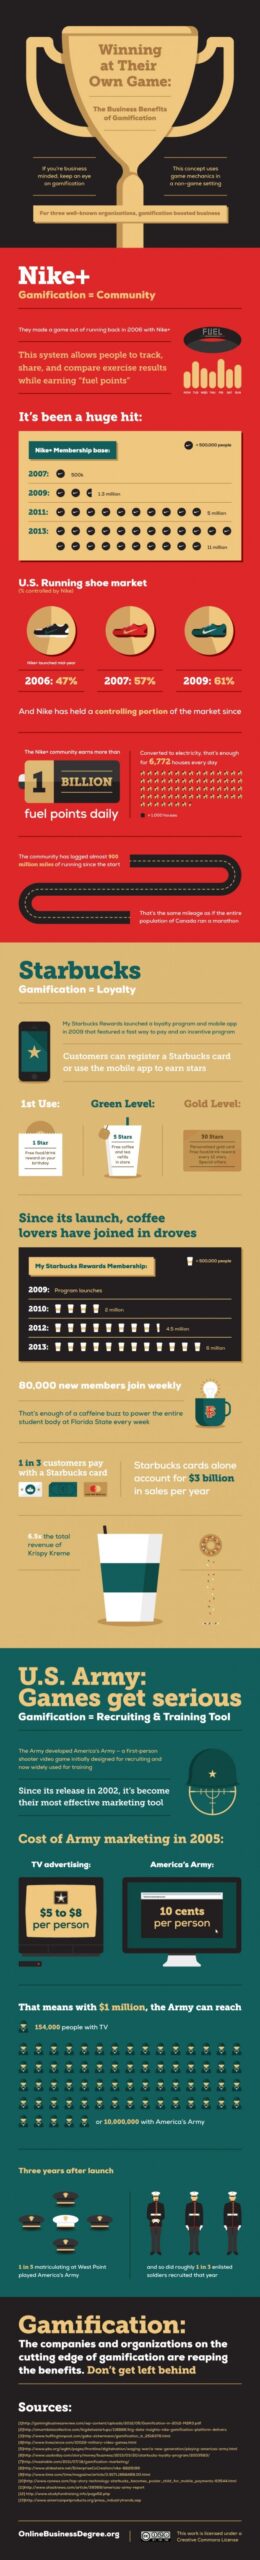 The-Business-Benefits-of-Gamification-Infographic